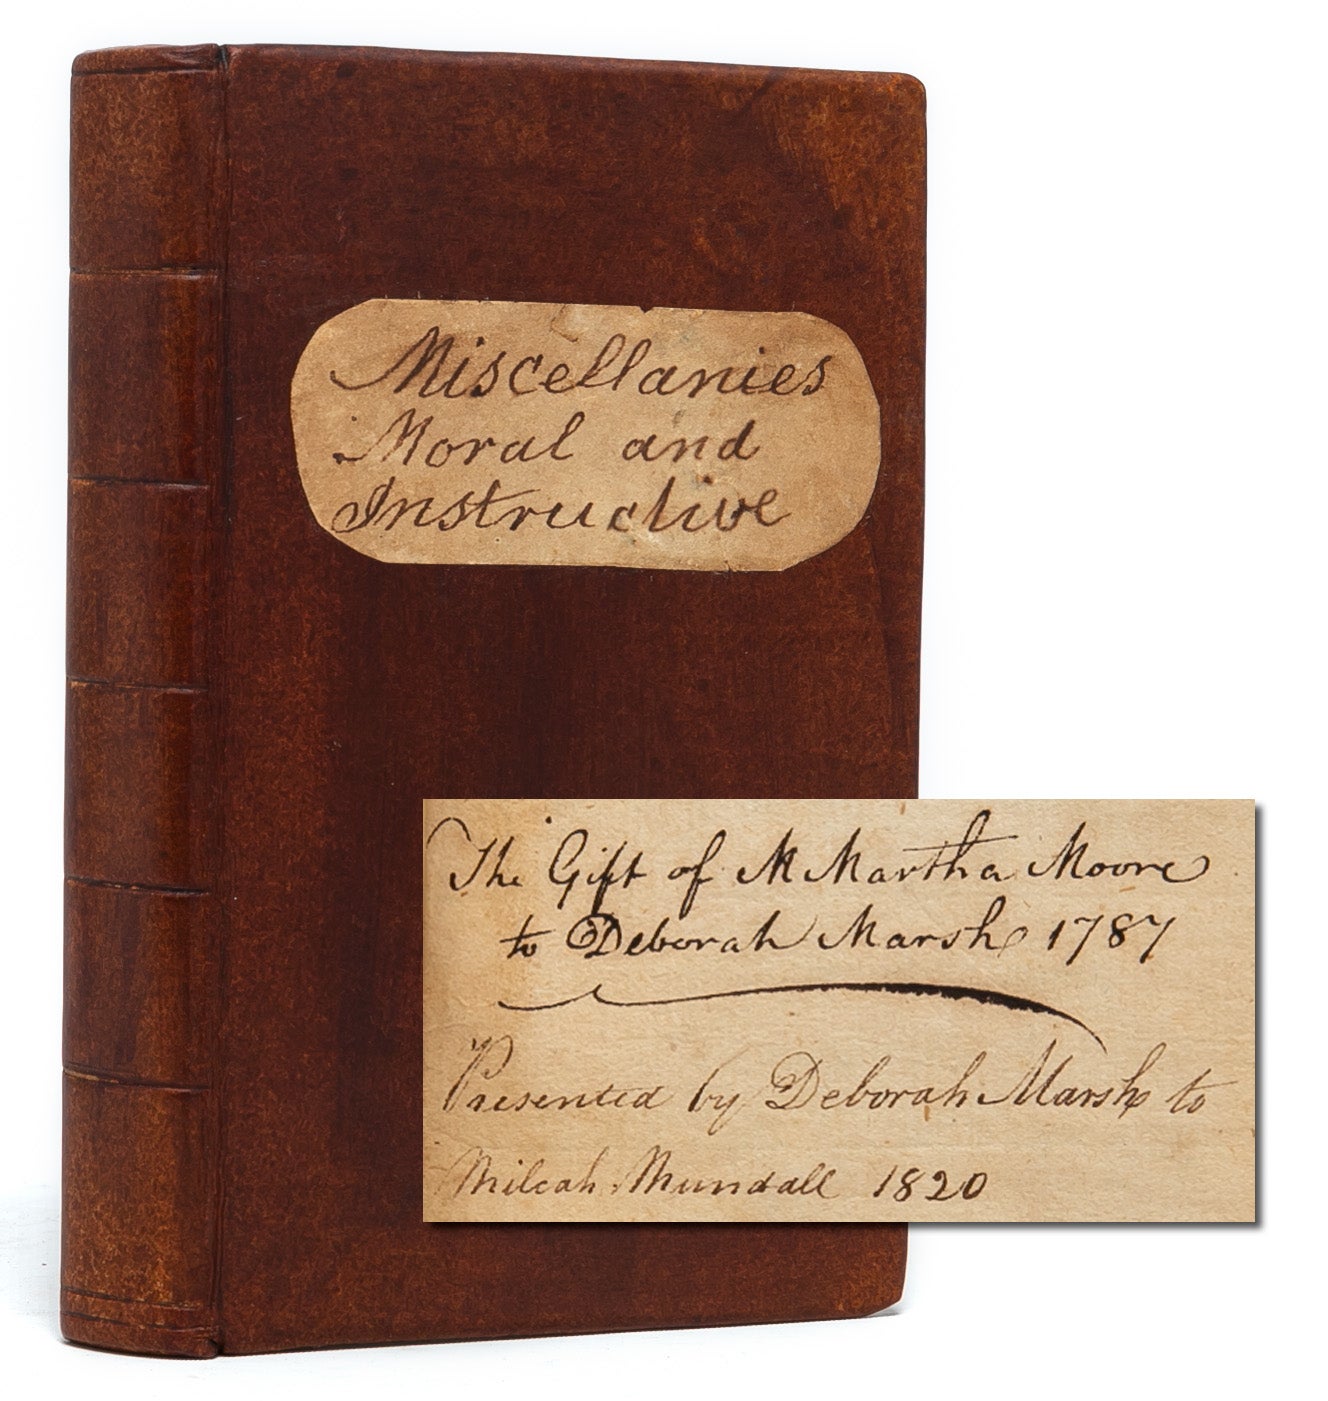 (Item #5978) Miscellanies, Moral and Instructive in Prose and Verse; Collected from Various Authors, for the use of Schools and Improvement of Young Persons of Both Sexes (Association Copy). Mrs. Milcah Martha Moore, Early American Education.